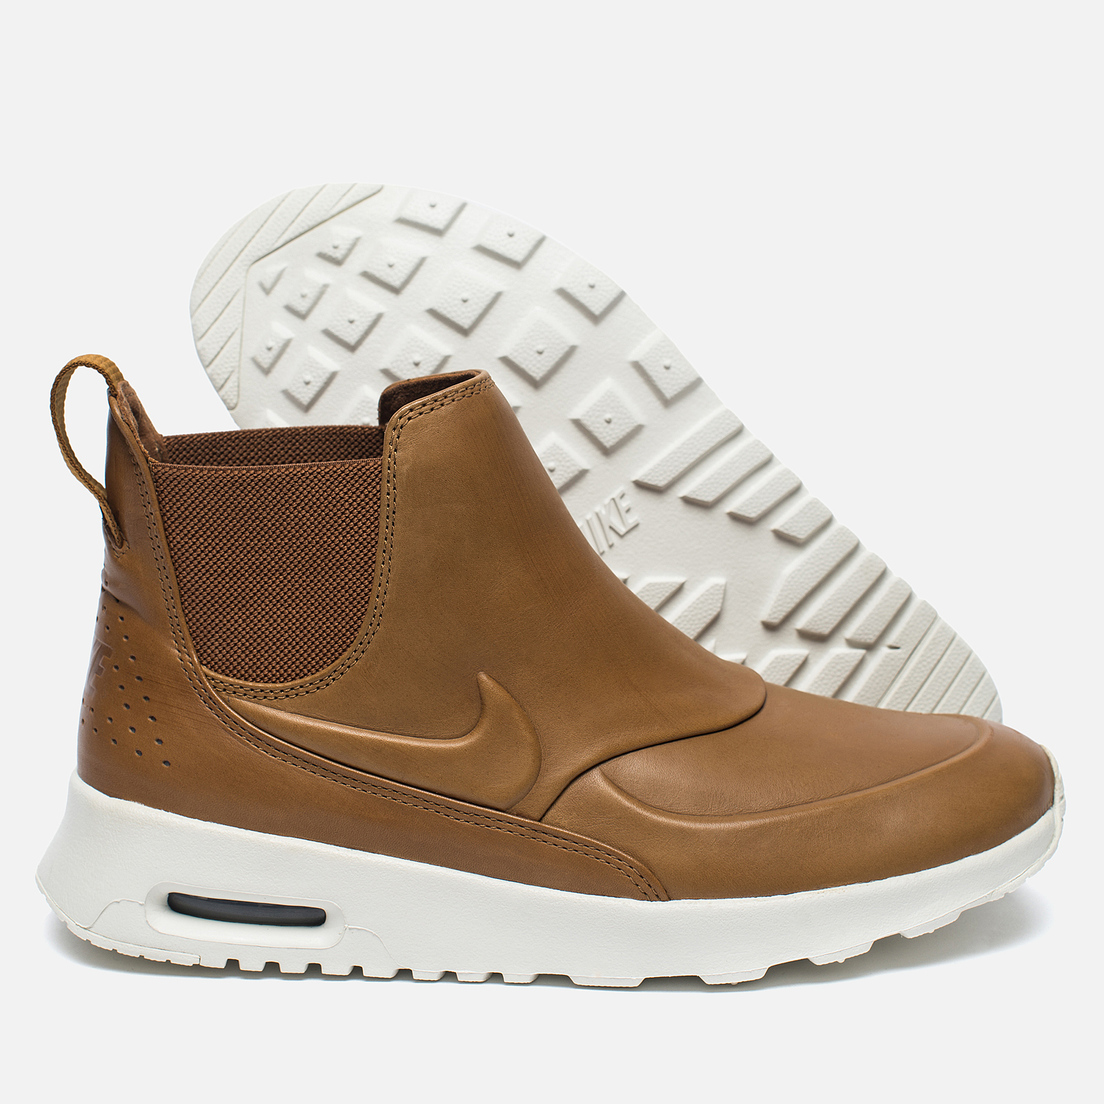 Nike Женские кроссовки Air Max Thea Mid